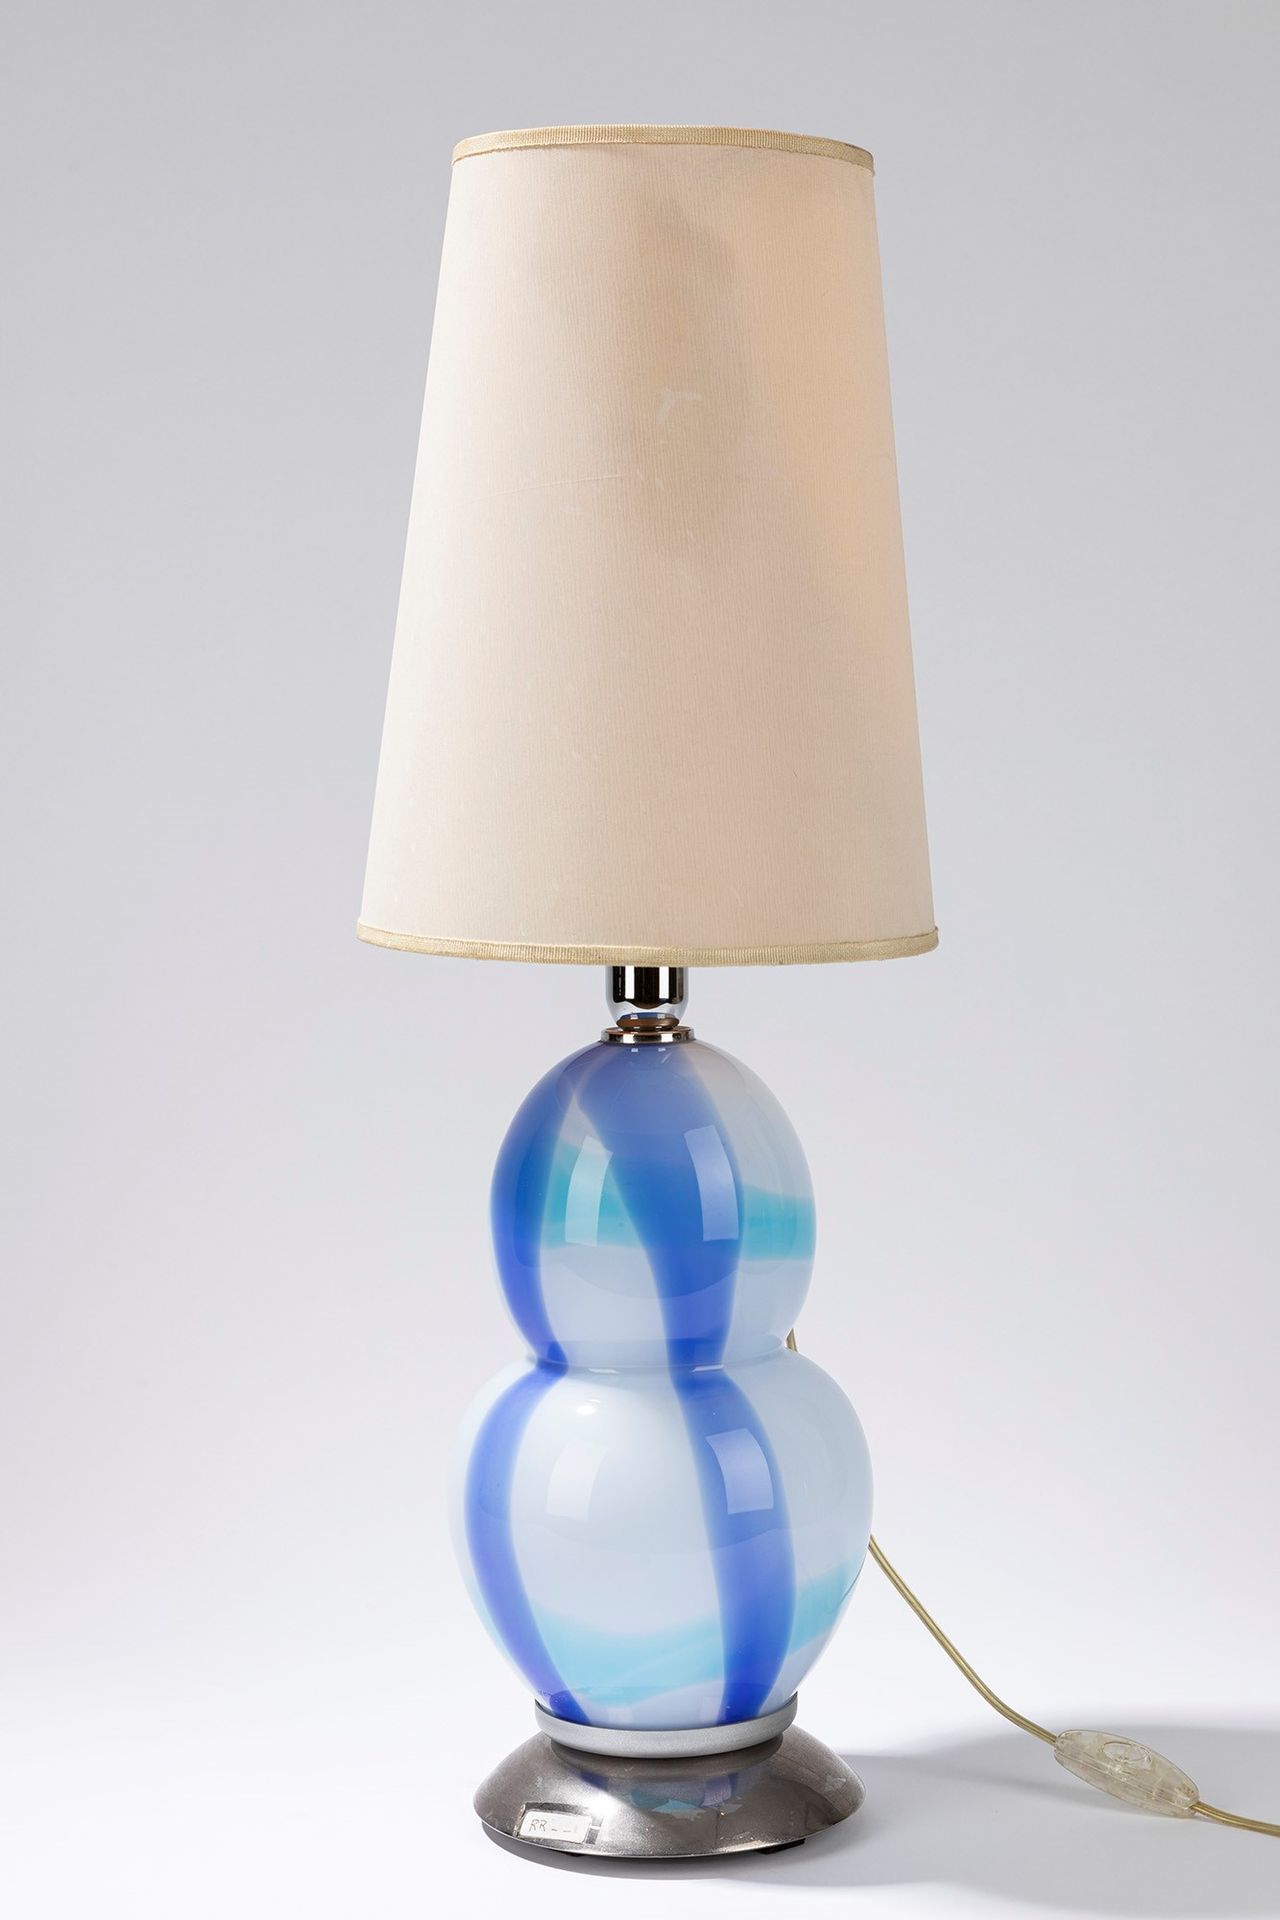 Ettore Sottsass Table lamp, 70's period

cm h 64,5 x 20
polychrome glass.